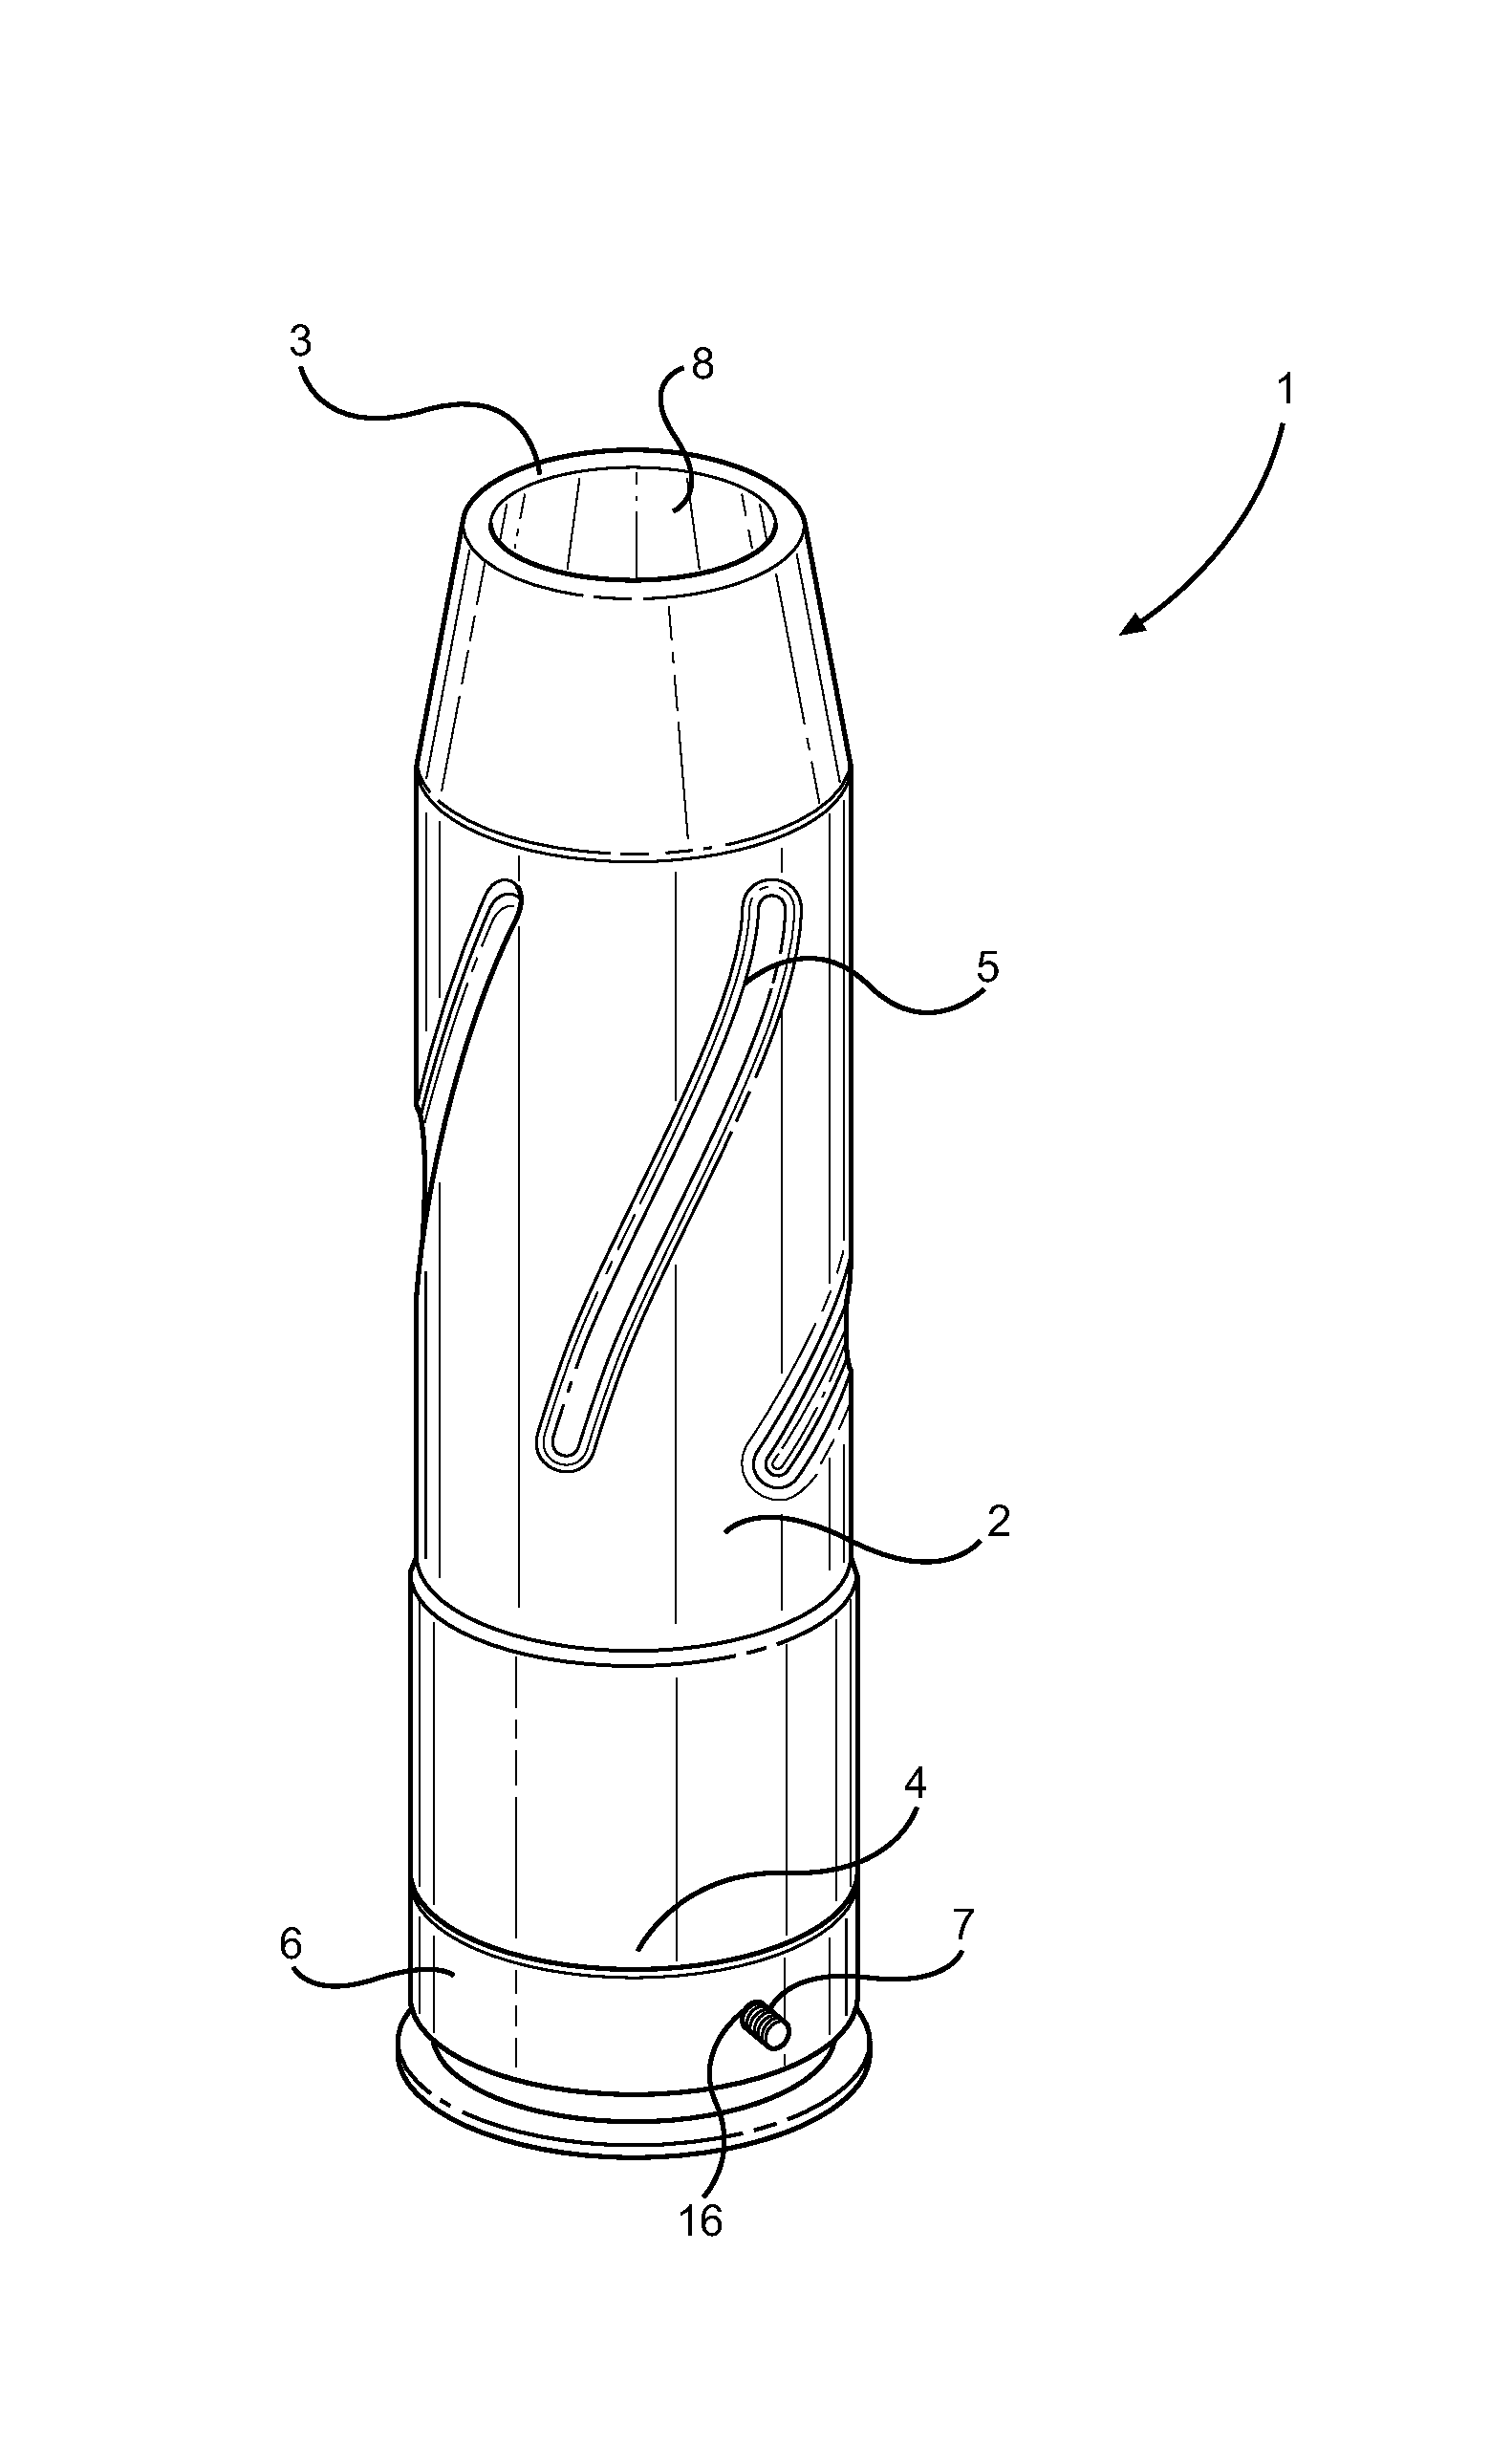 Munition having a reusable housing assembly and a removable powder chamber